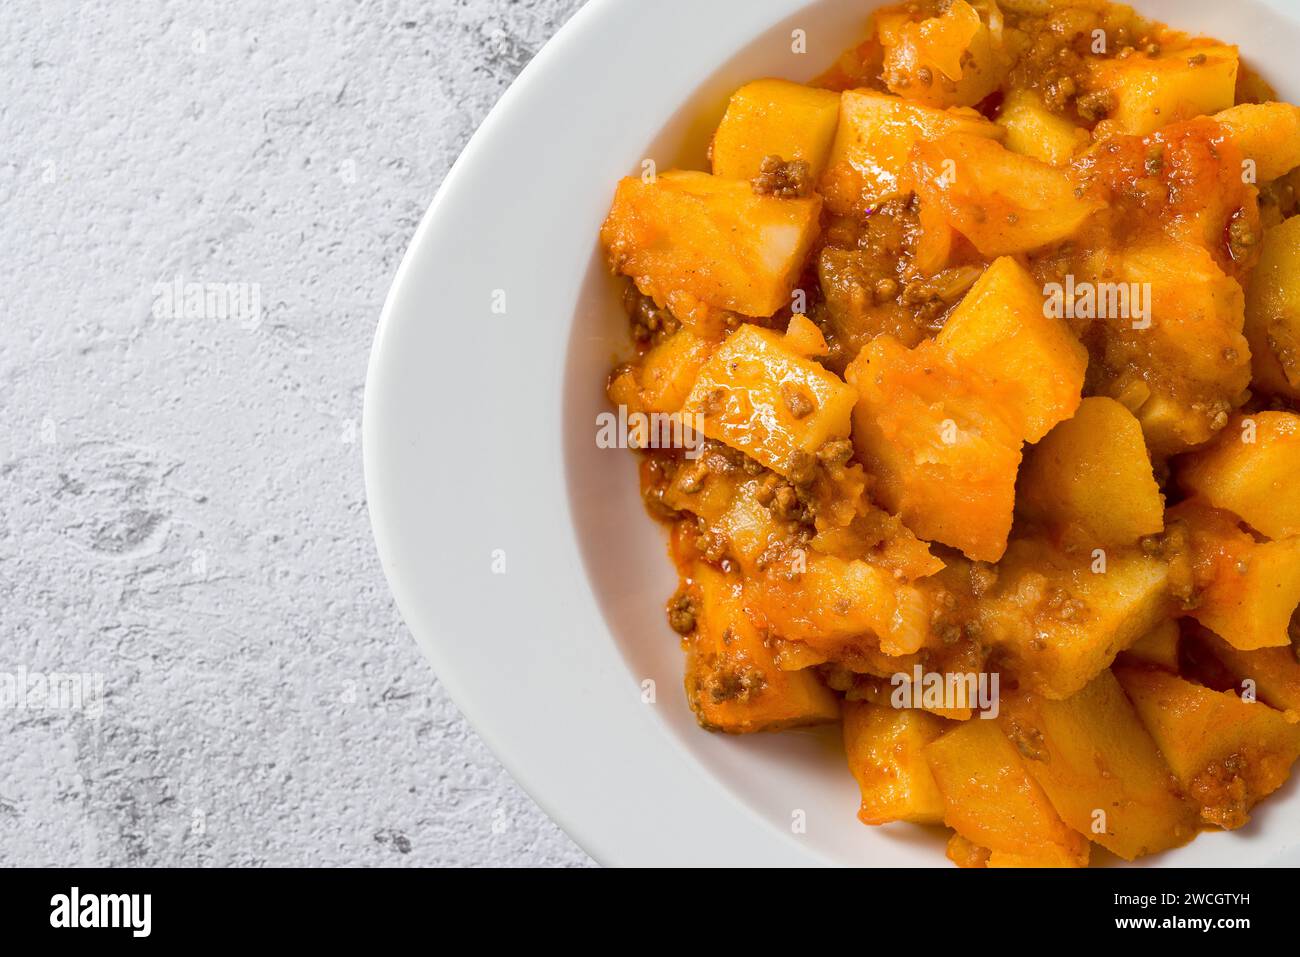 Minced meat and potato dish on white porcelain plate on stone table Stock Photo